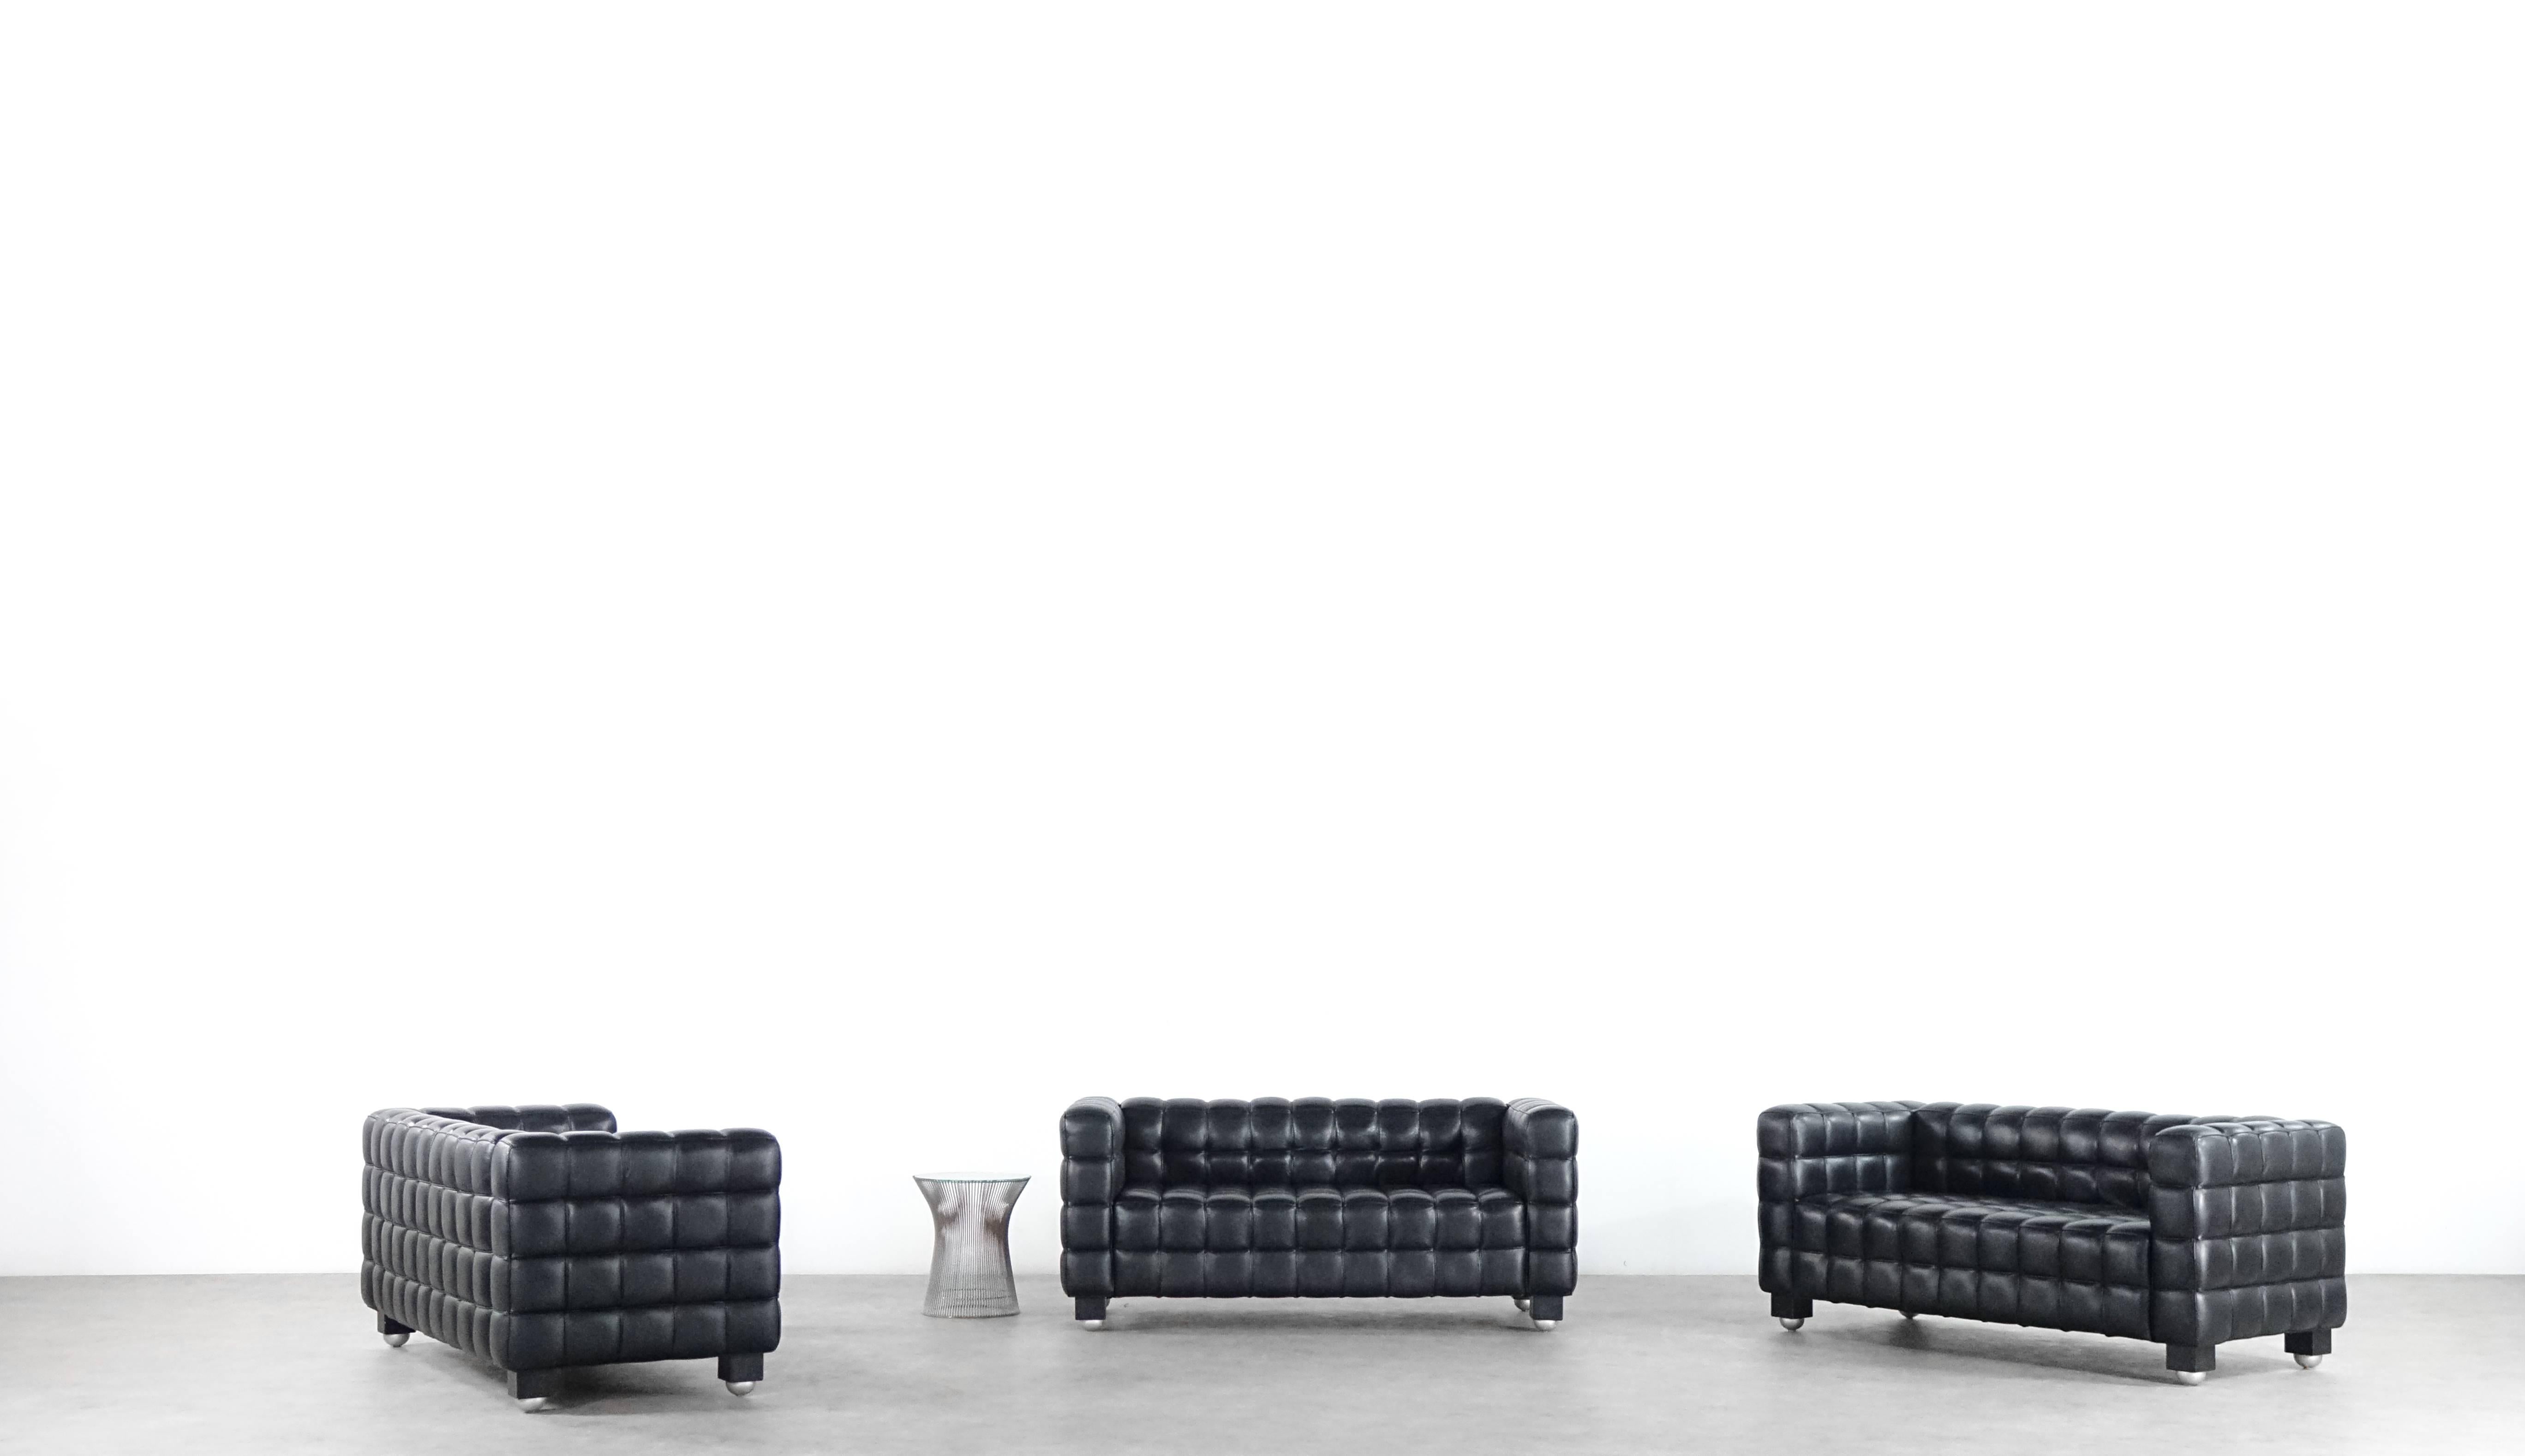 1x Kubus sofas, designed in 1910 by Josef Hoffmann. Edition by Wittmann/Austria. Excellent condition in black leather!

